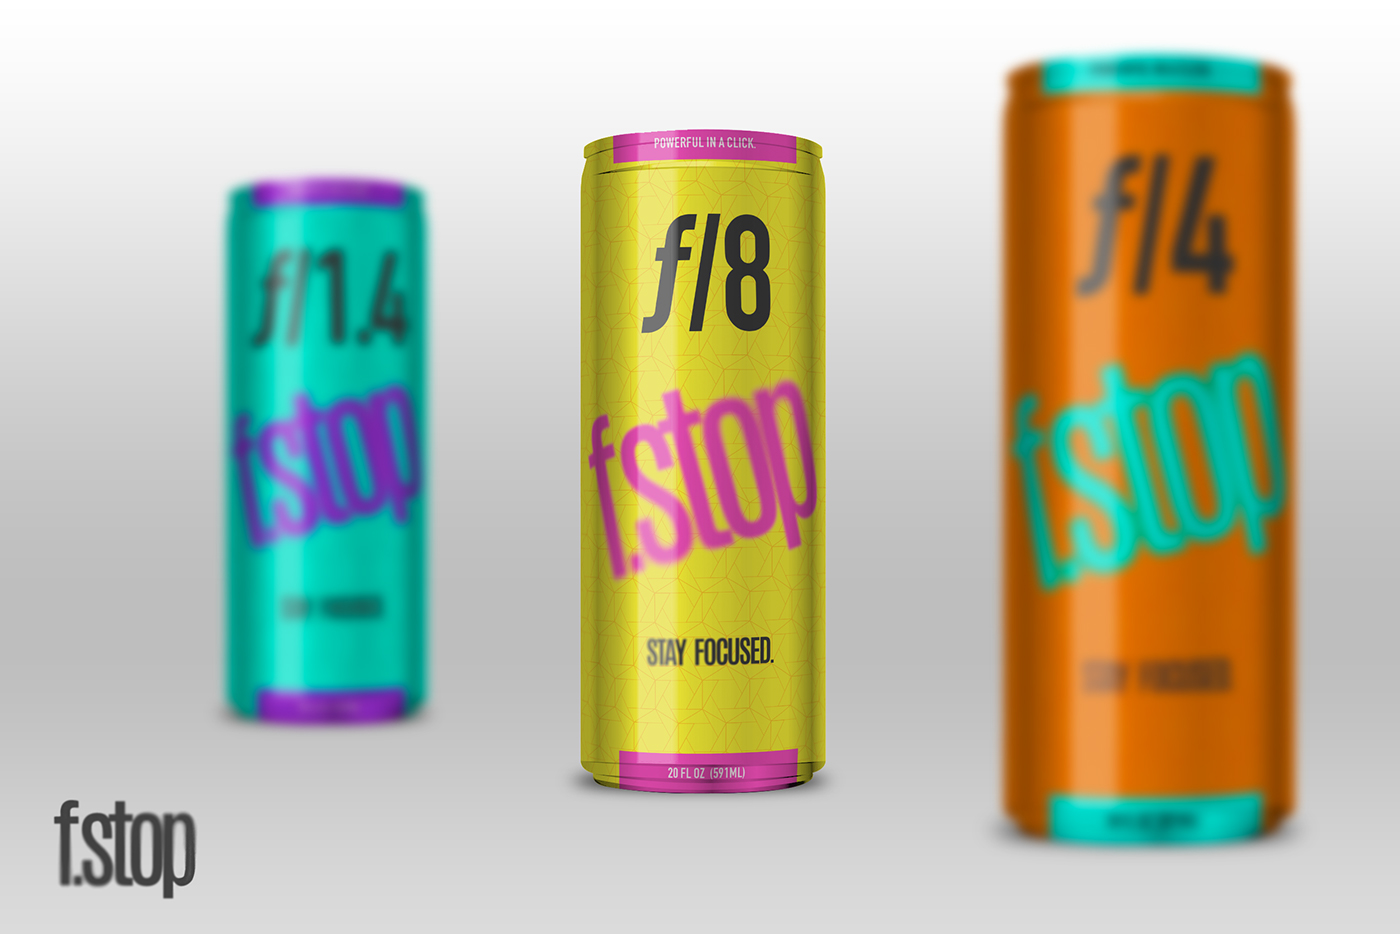 f.stop Photography  package design  graphic design  energy drink cup Mockup design free mockup  beer